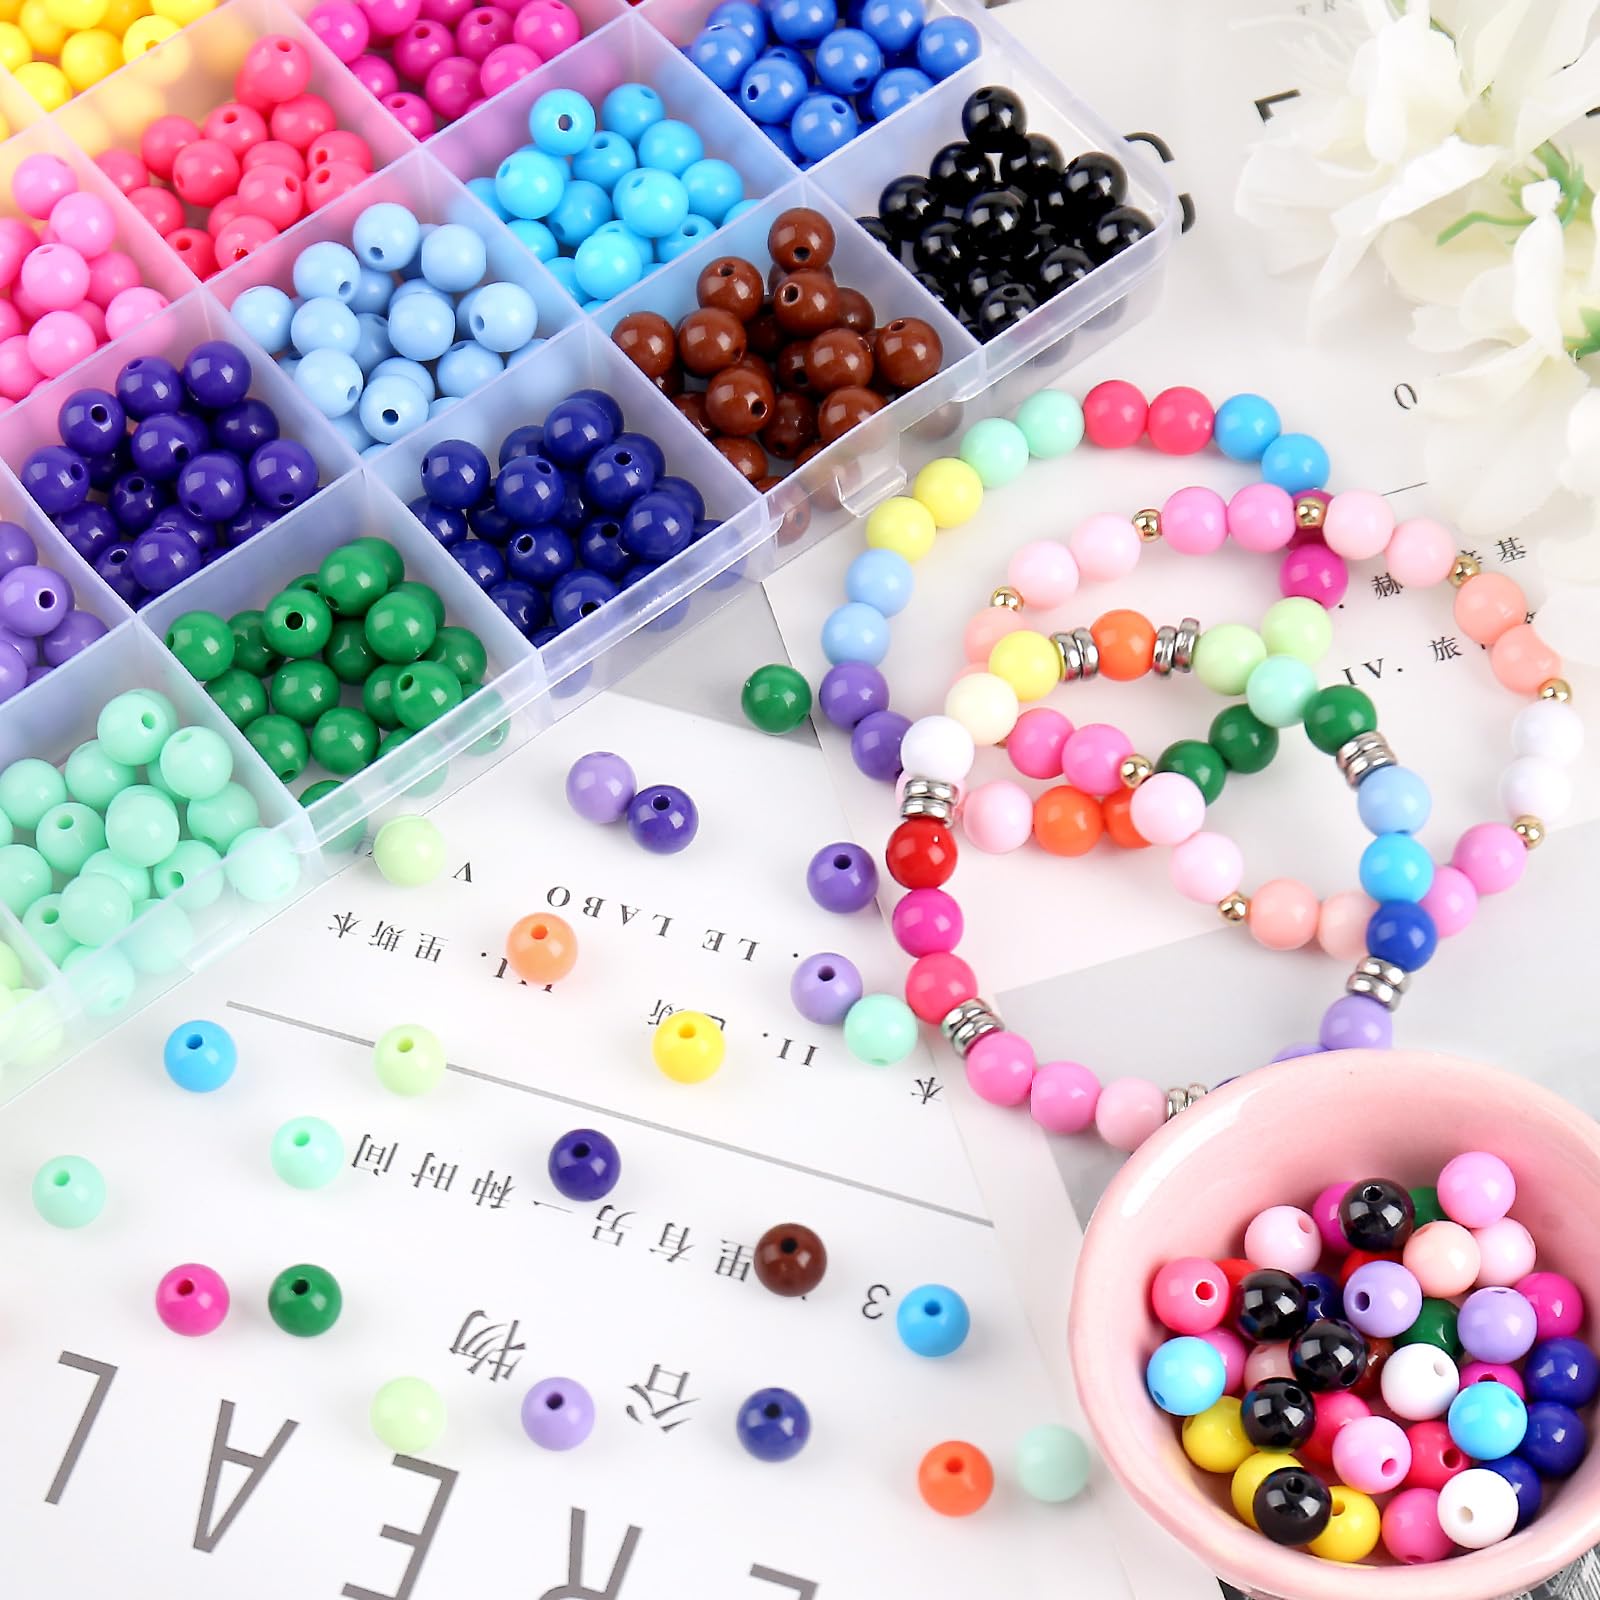 1440Pcs 6mm Candy Color Acrylic Round Beads, 24 Colors Assorted Plastic Bubble Gum Beads with Hole Loose Beads Bulk for Bracelets Necklace Jewelry Making DIY Crafts